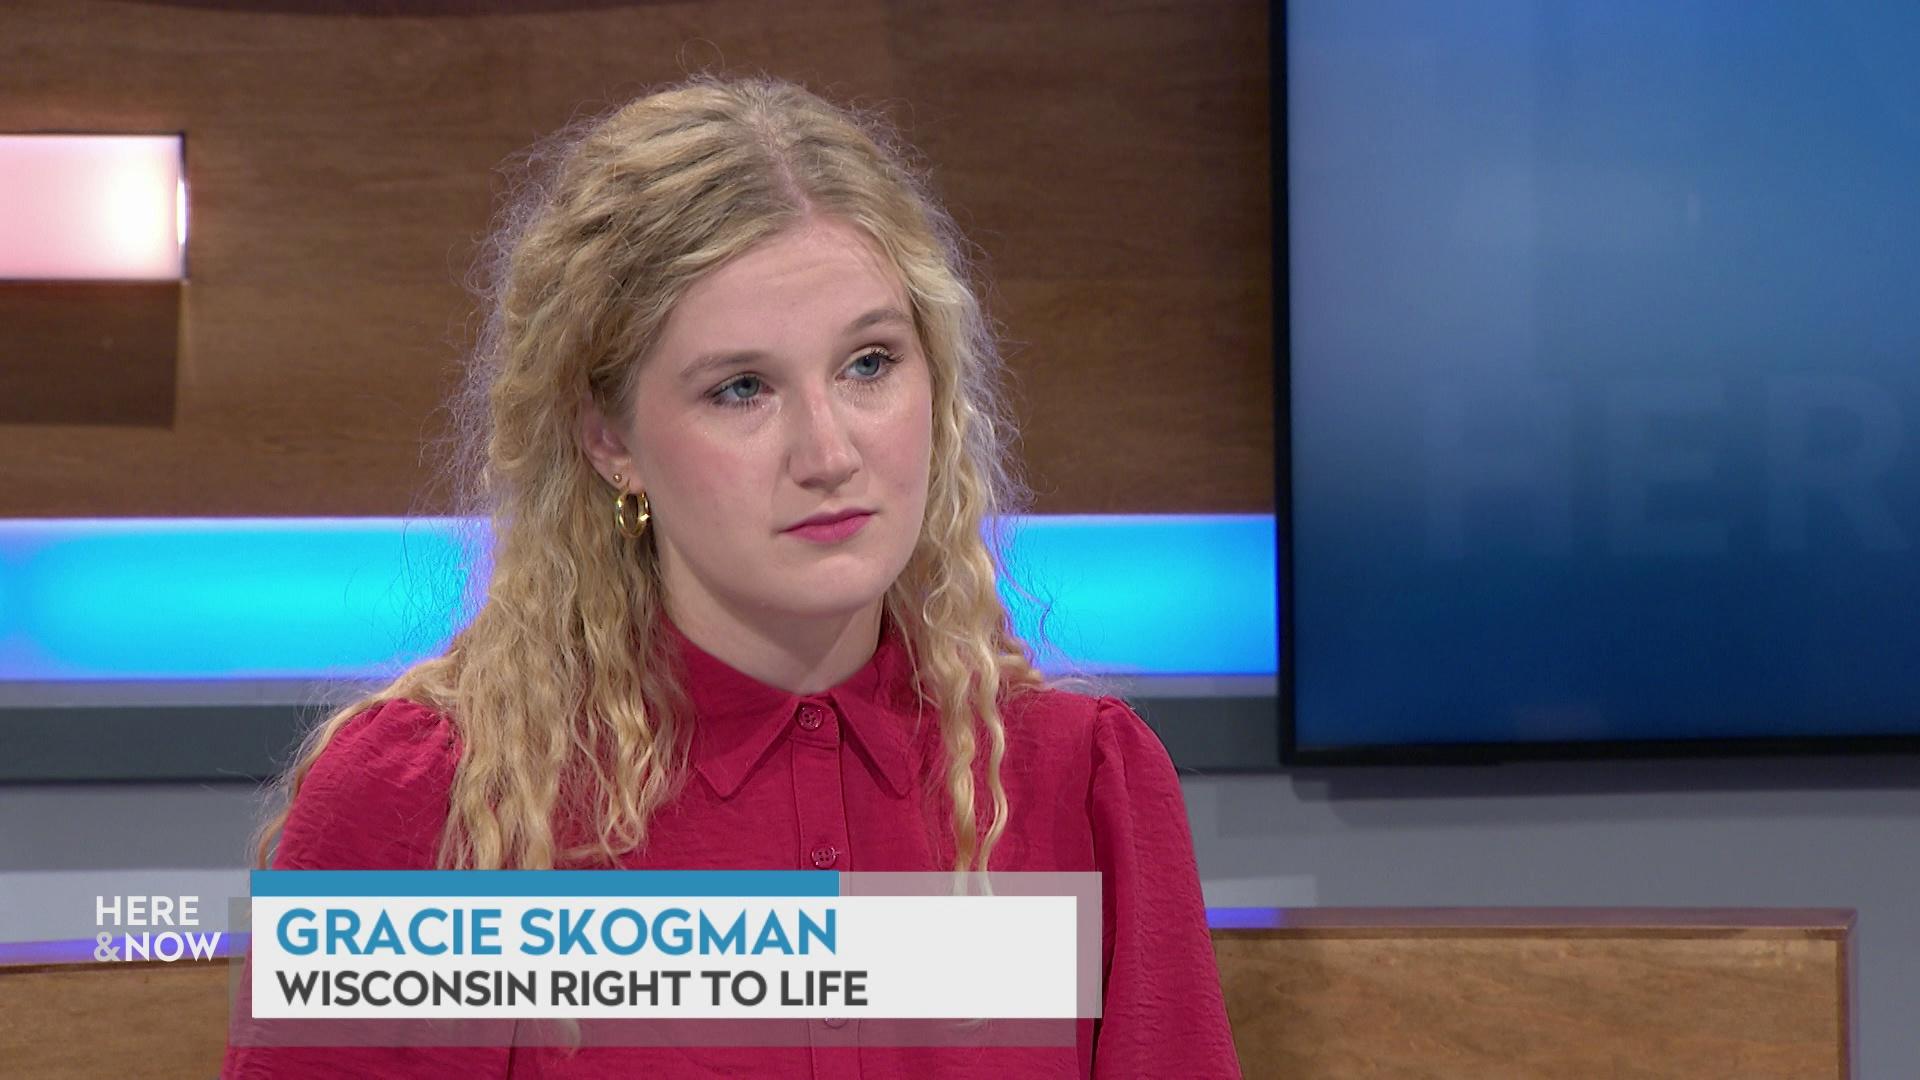 A still image shows Gracie Skogman seated at the 'Here & Now' set featuring wood paneling, with a graphic at bottom reading 'Gracie Skogman' and 'Wisconsin Right to Life.'